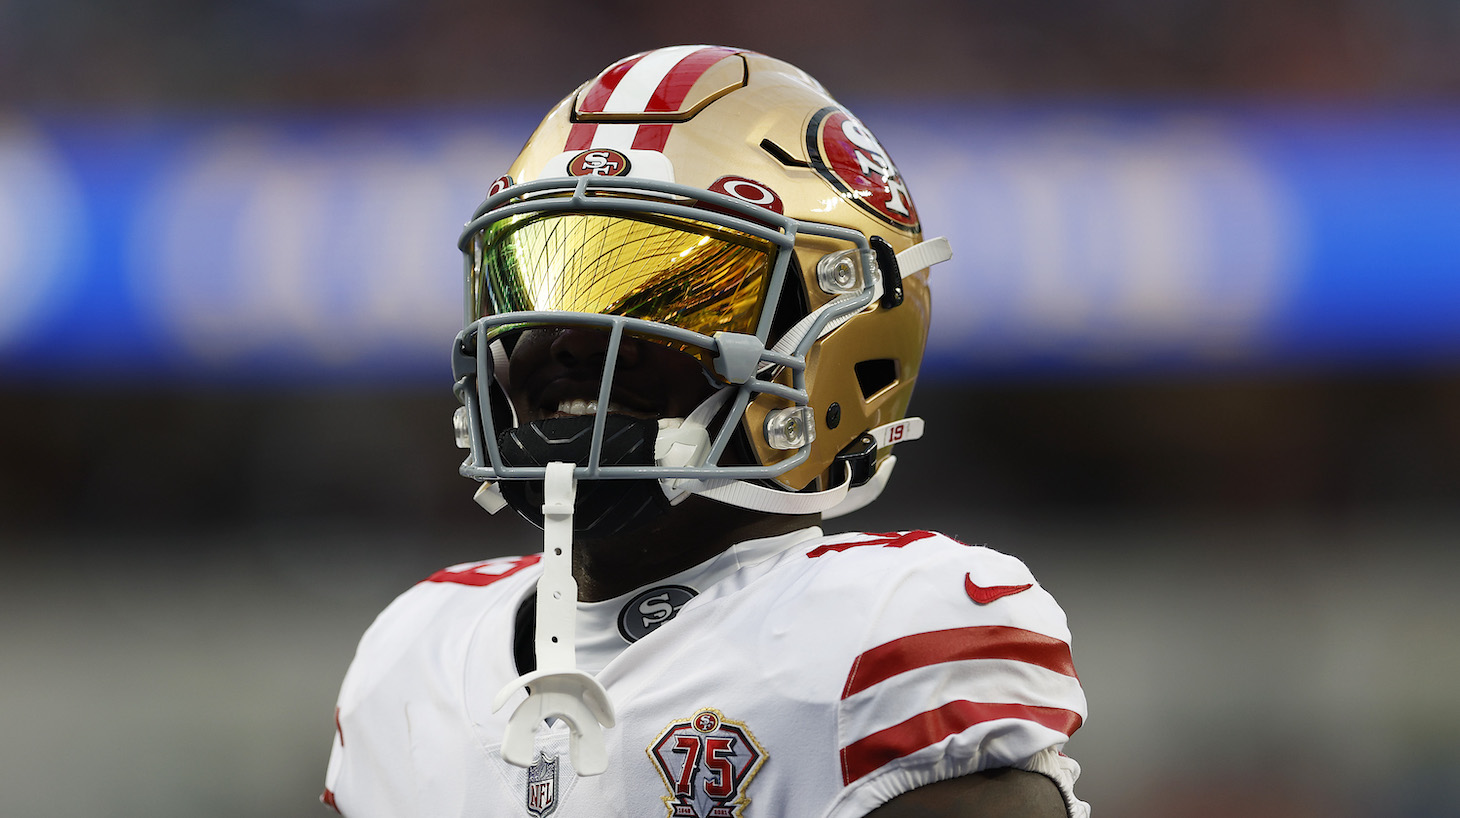 INGLEWOOD, CALIFORNIA - JANUARY 30: Deebo Samuel #19 of the San Francisco 49ers looks on during warm ups before the NFC Championship Game against the Los Angeles Rams at SoFi Stadium on January 30, 2022 in Inglewood, California. (Photo by Christian Petersen/Getty Images)